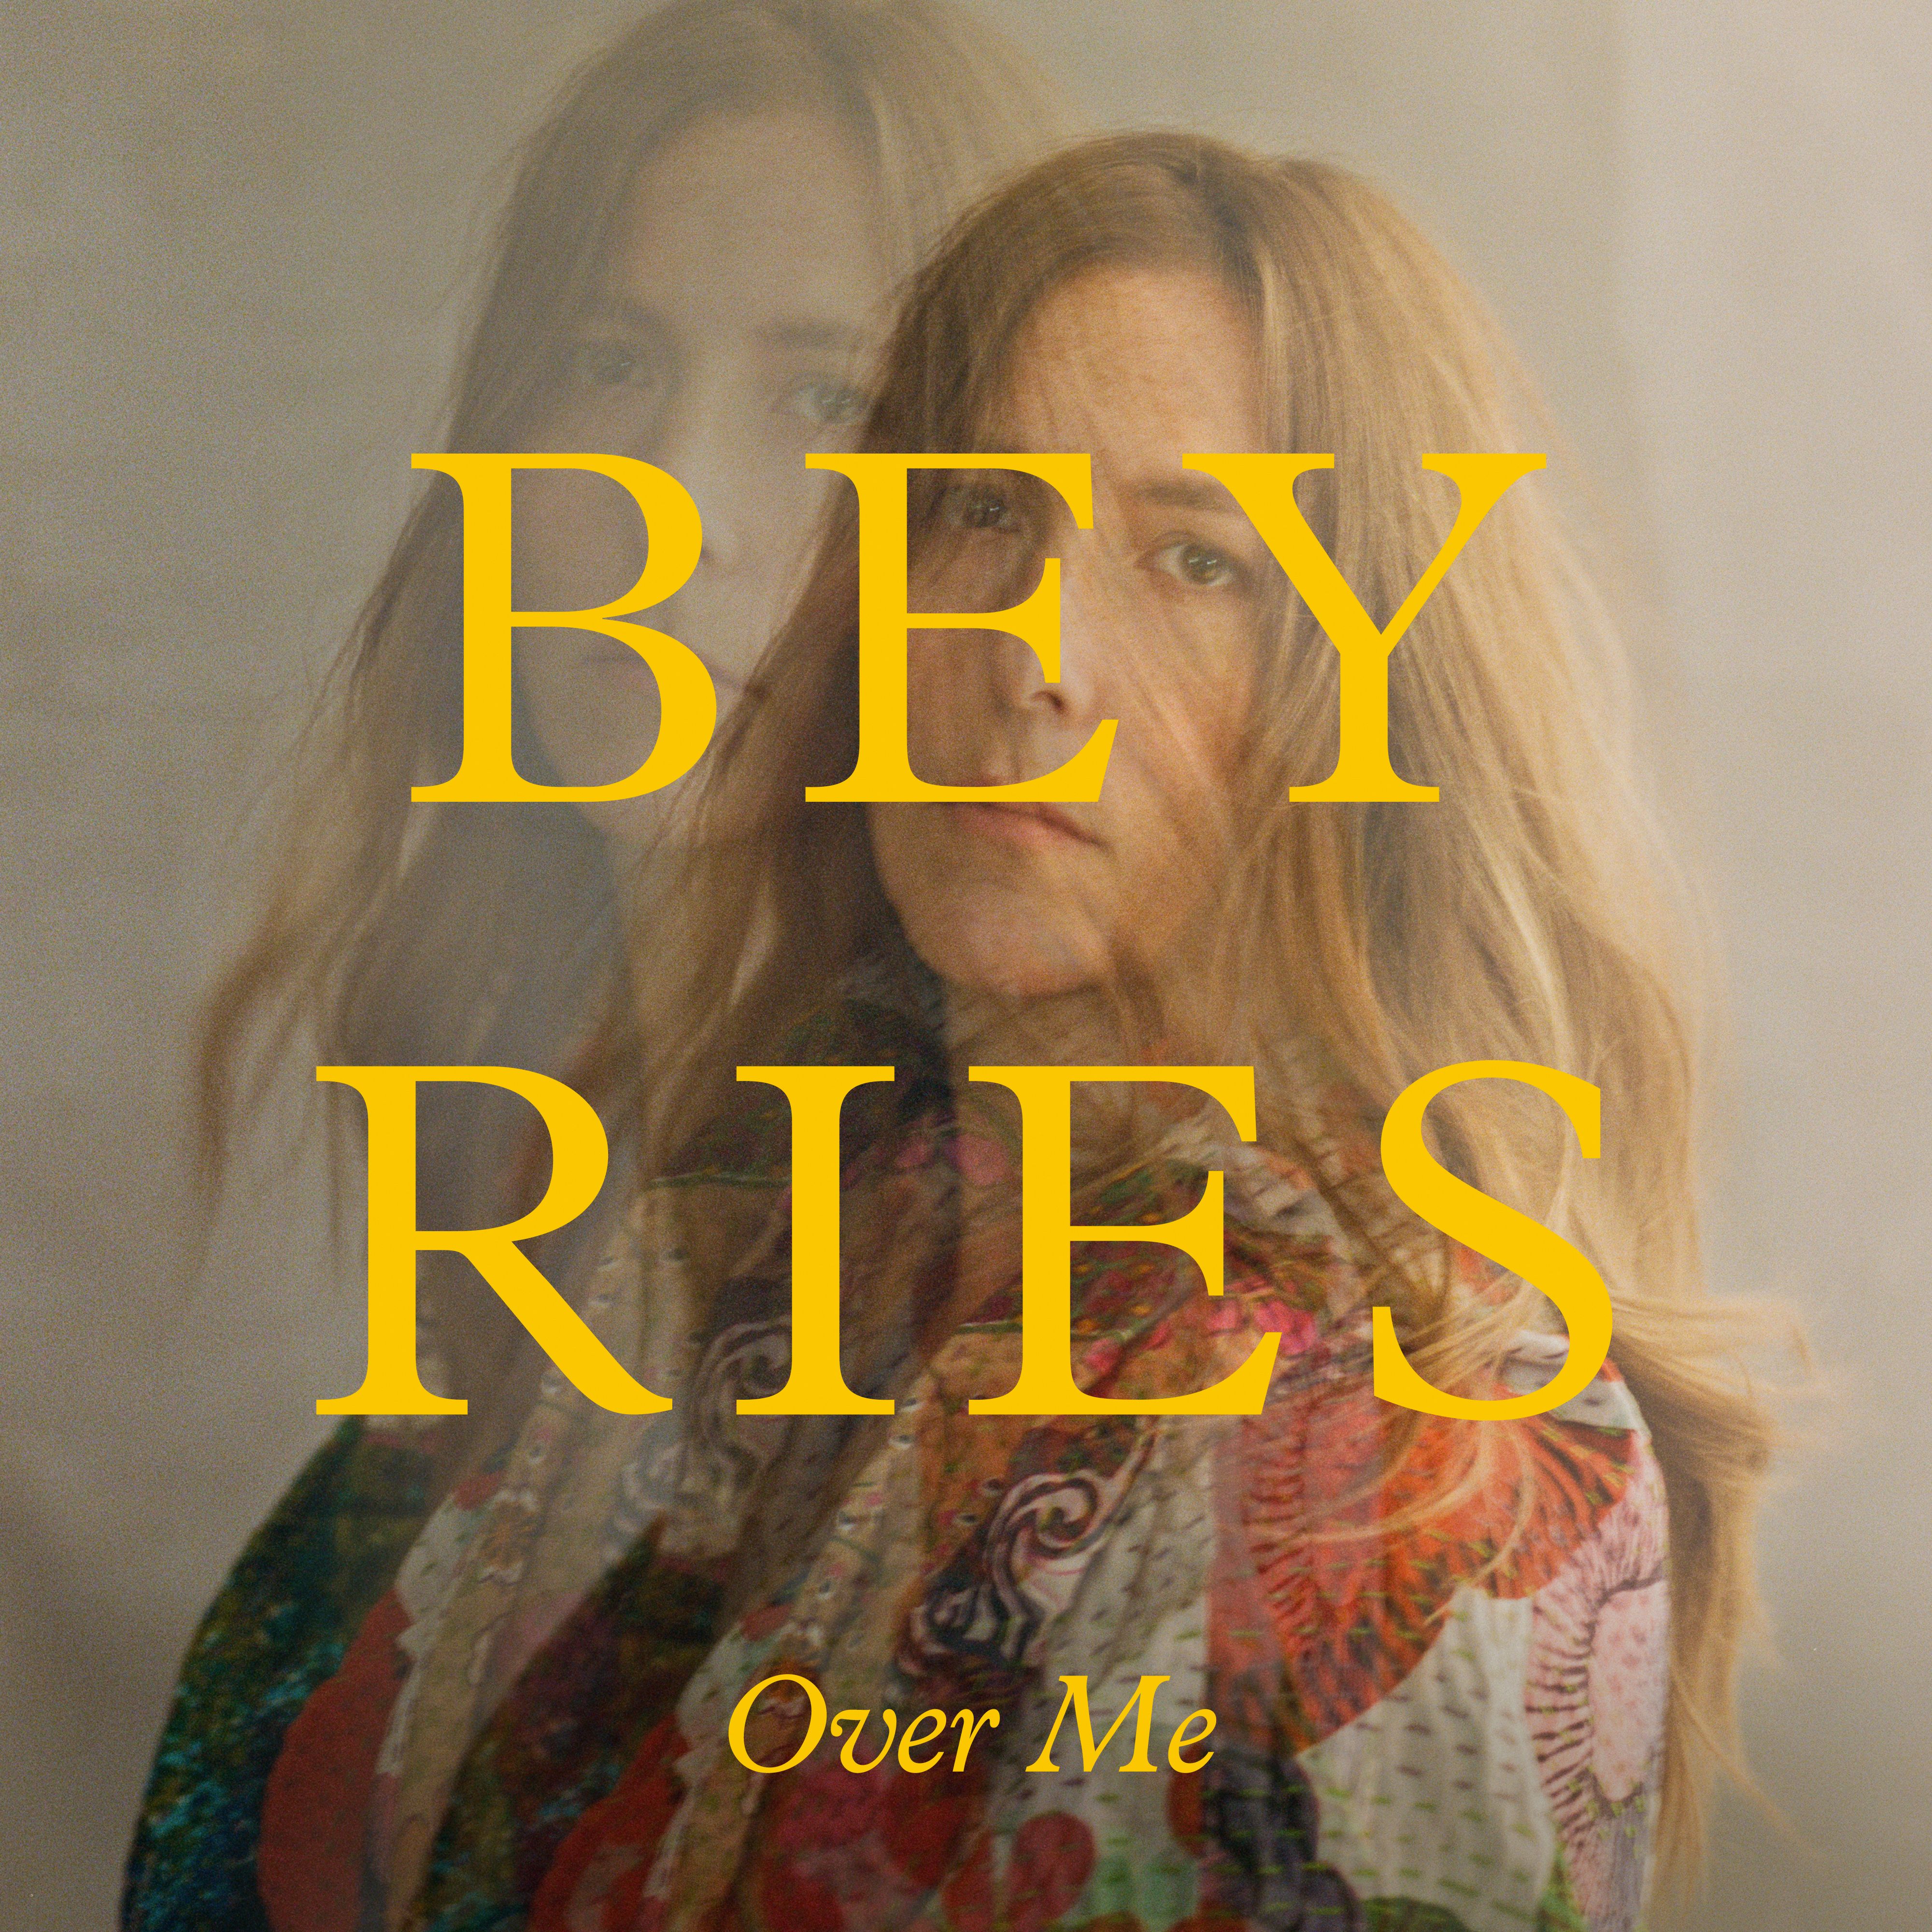 Beyries-over-me